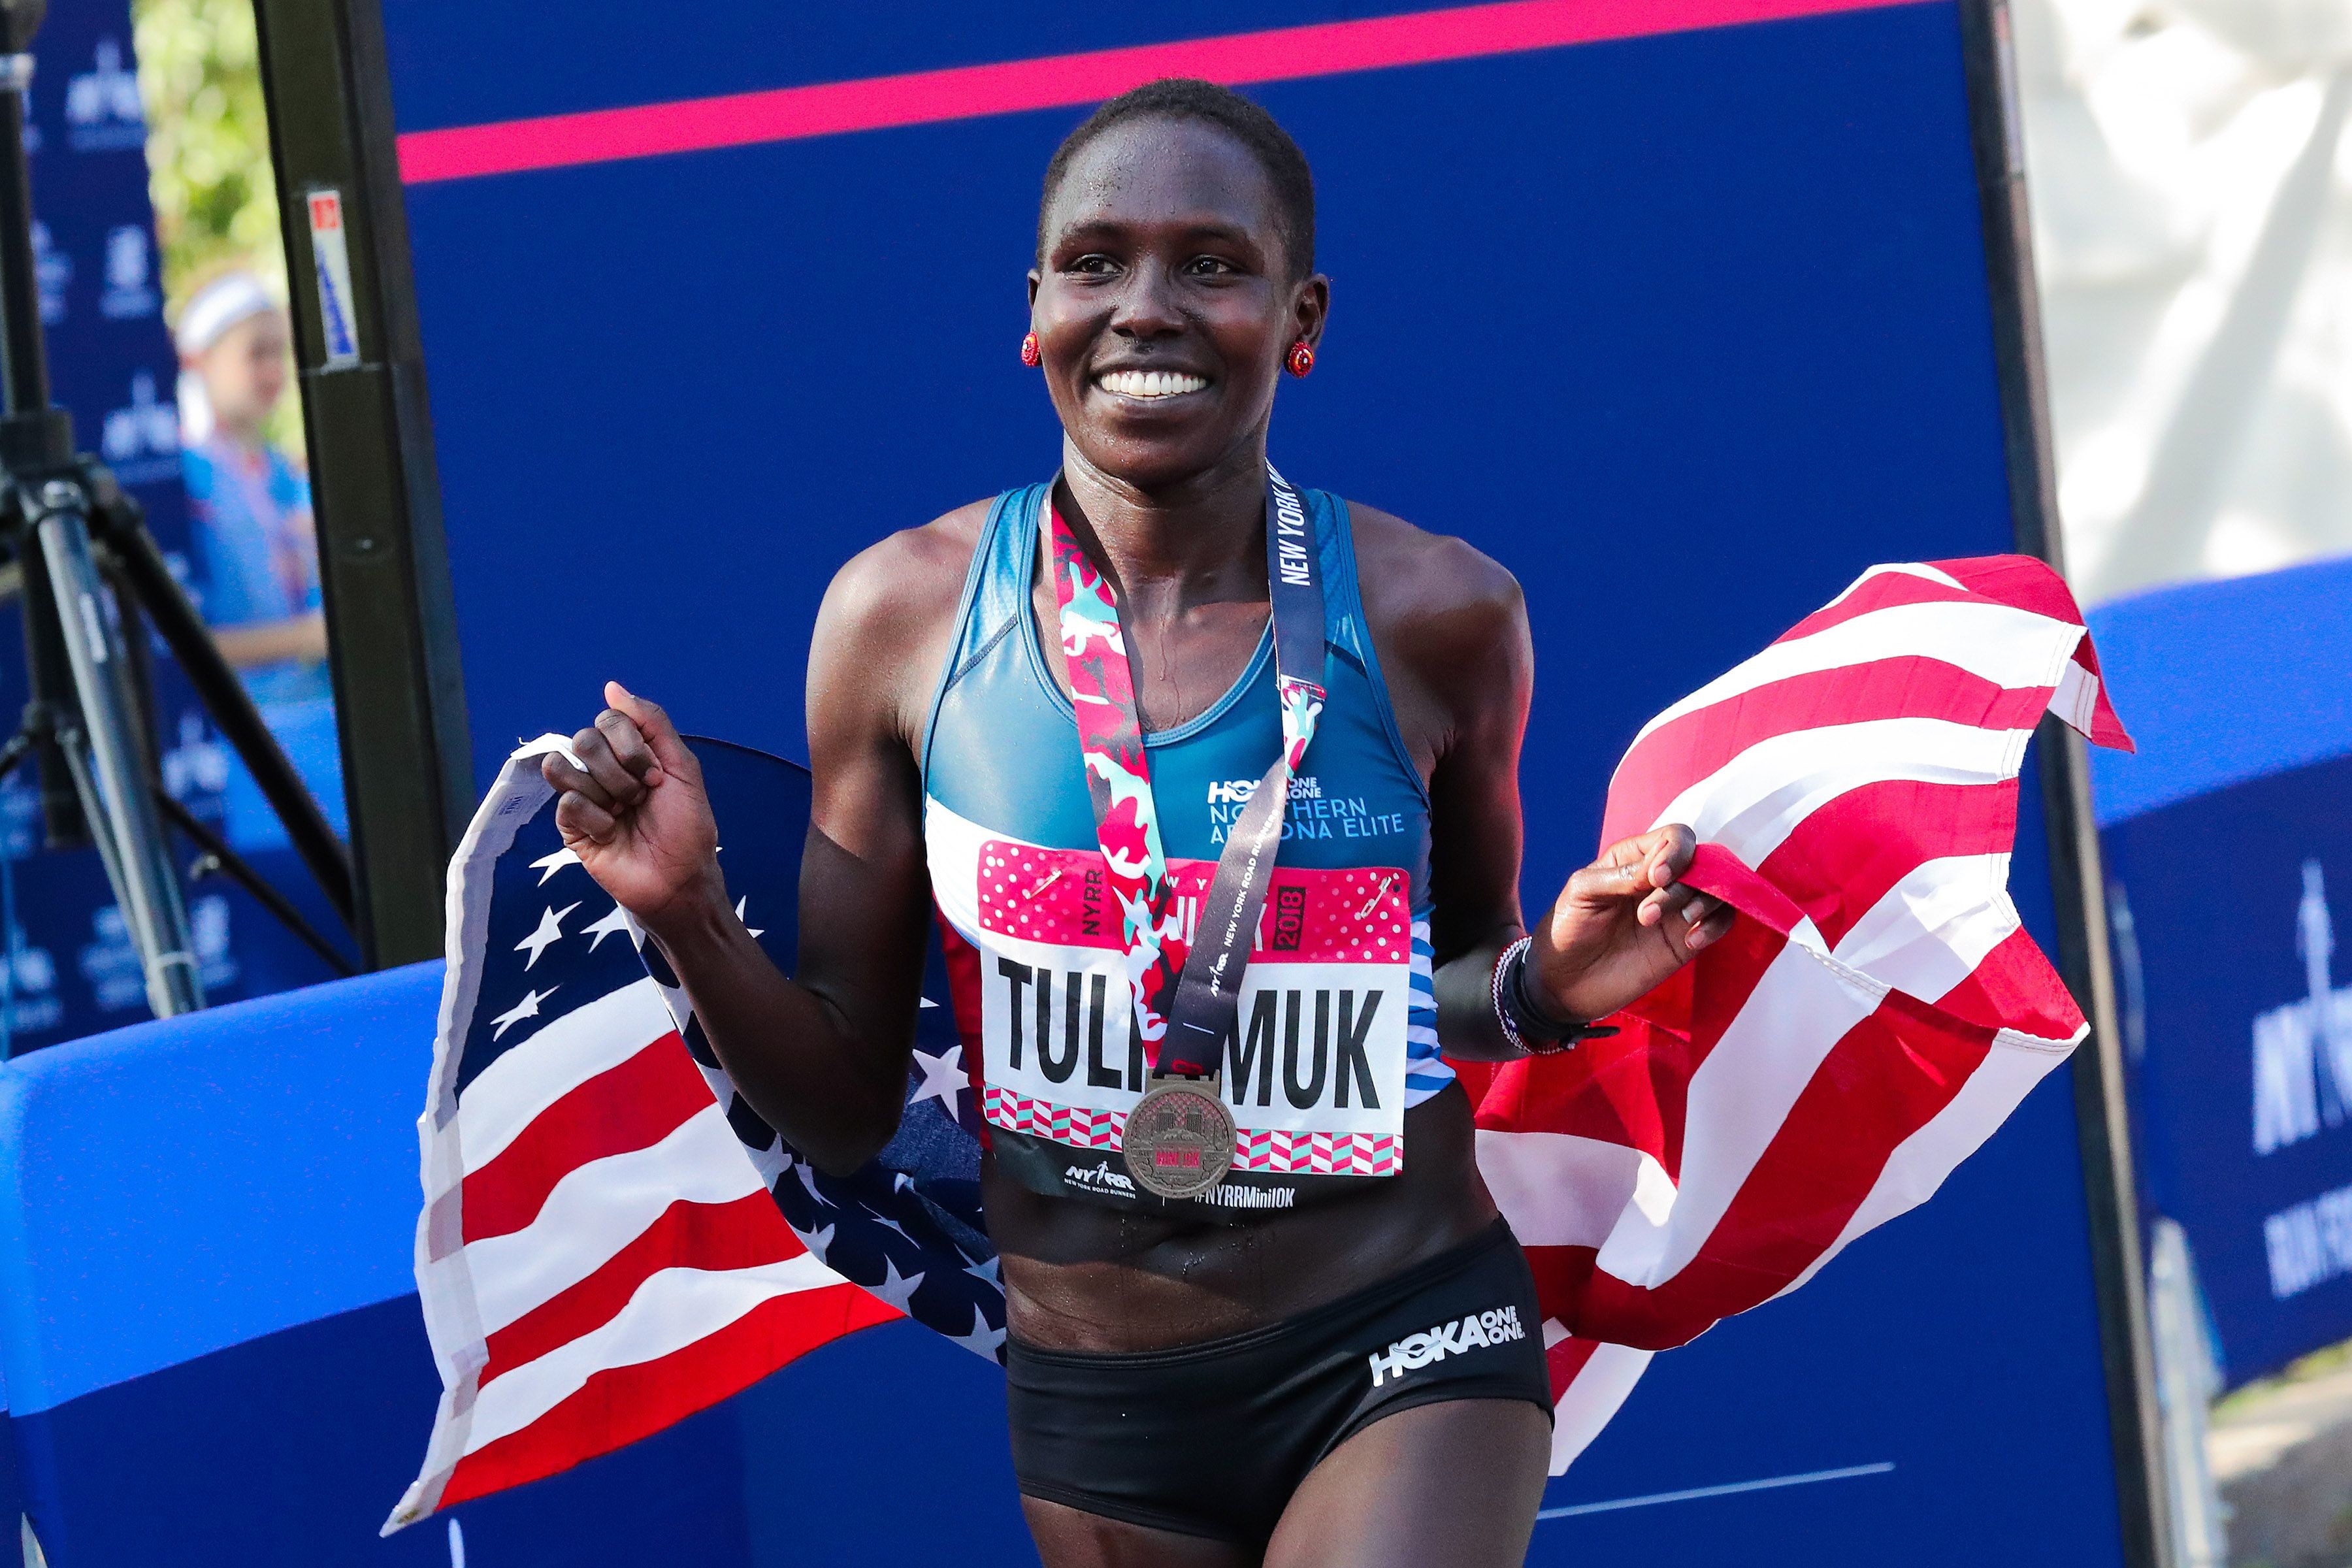 Aliphine Tuliamuk represents the American dream and she hopes she caps that dream by making the 2020 US Olympic Team